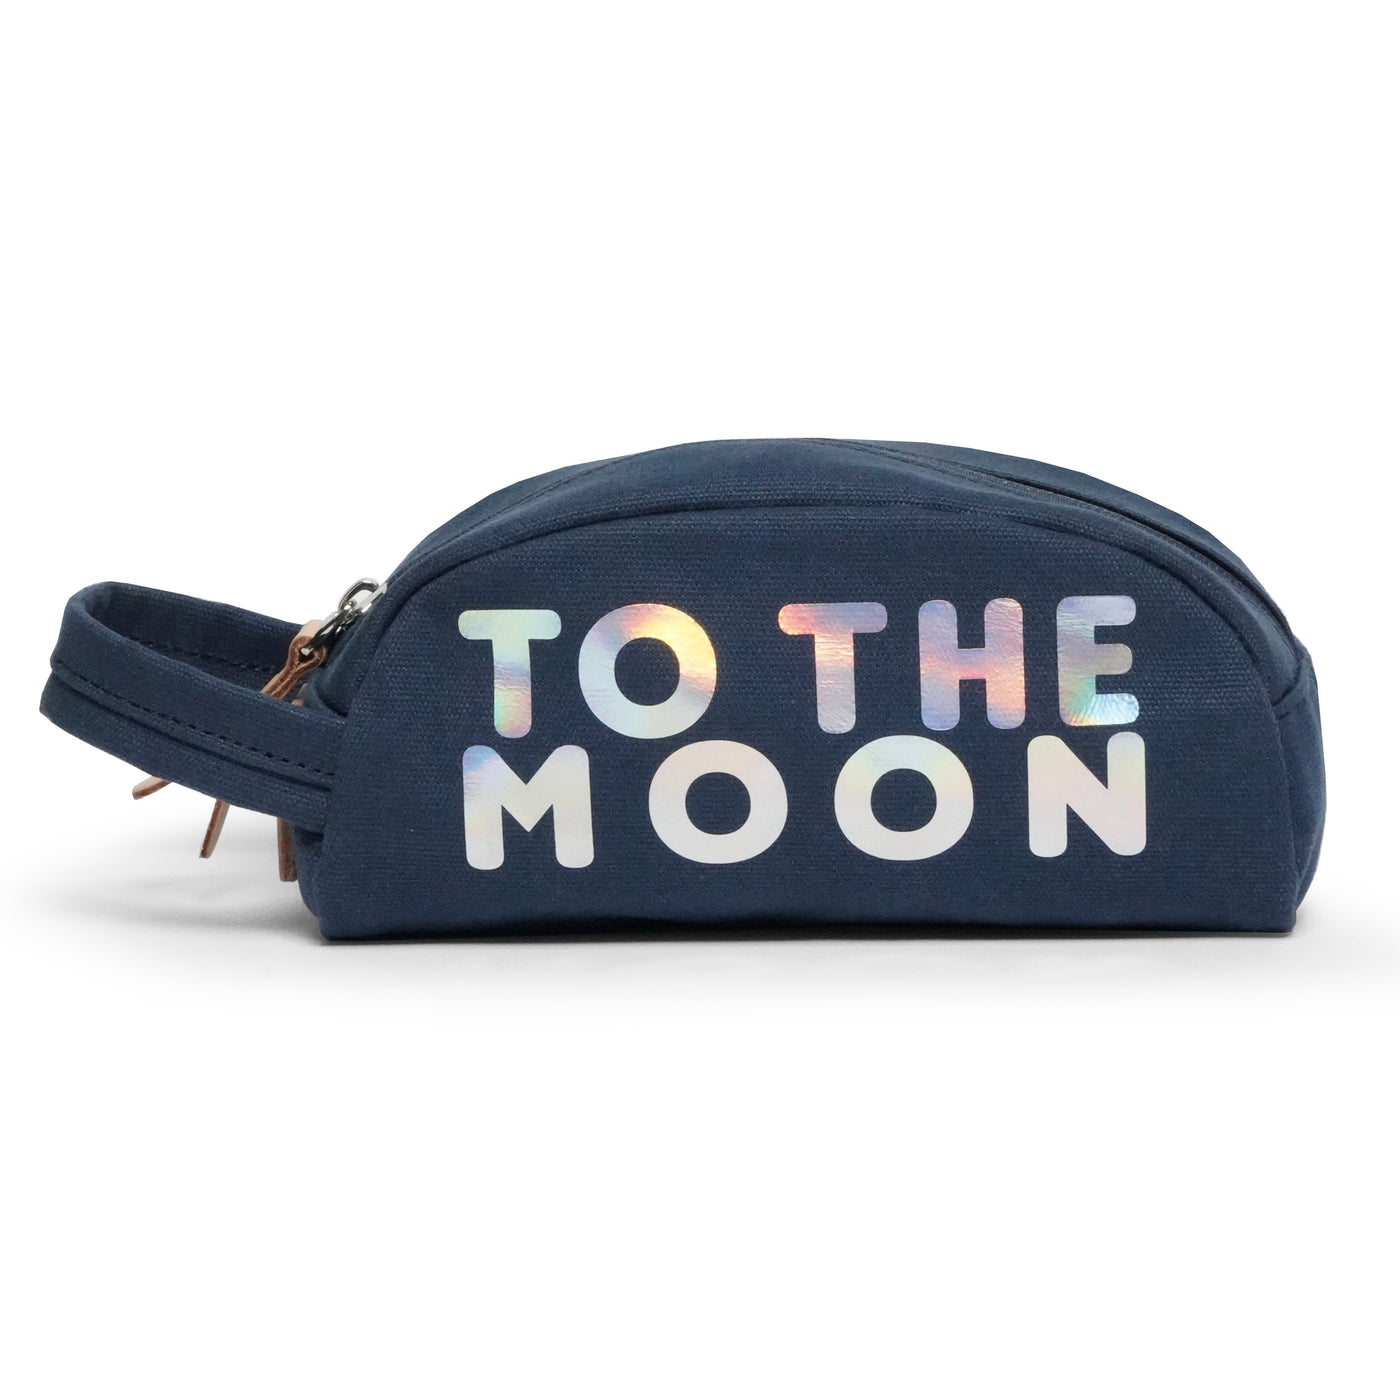 Large pencil case to the moon